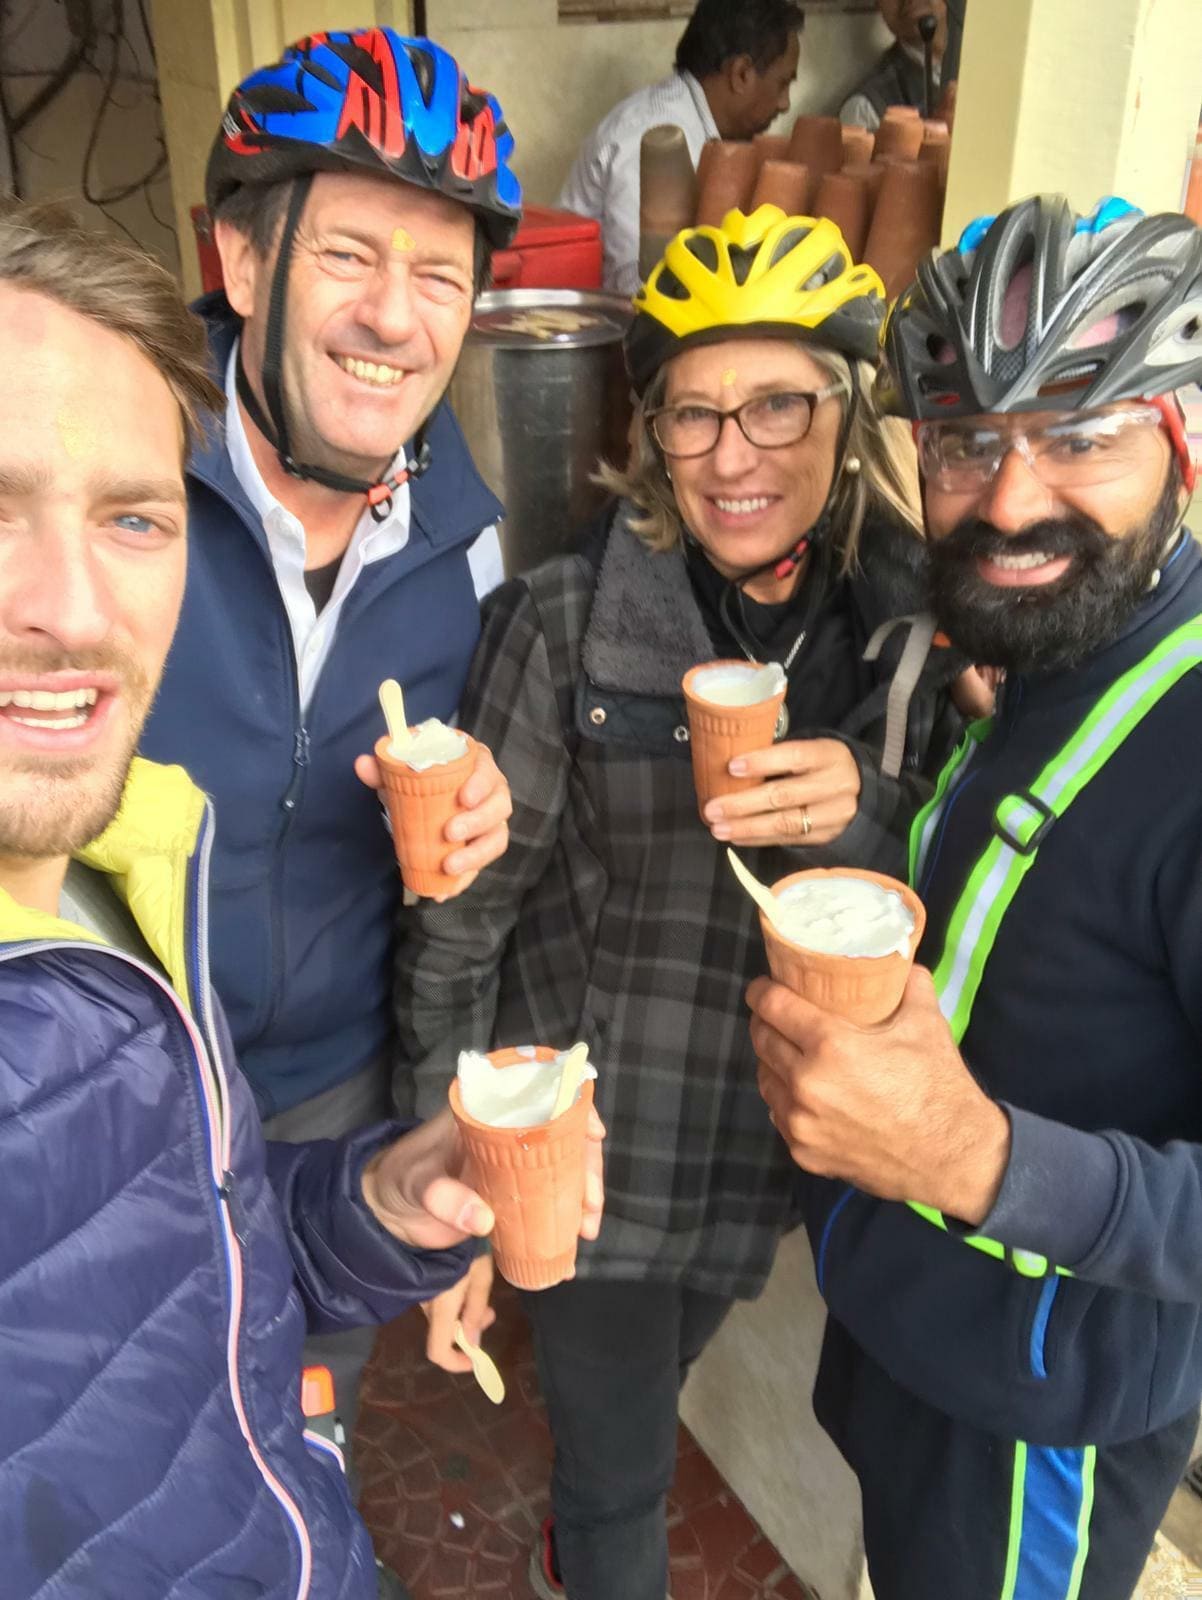 Our guests enjoying lassi (a yoghurt drink) during their cycle tour in a famous restaurant in Jaipur